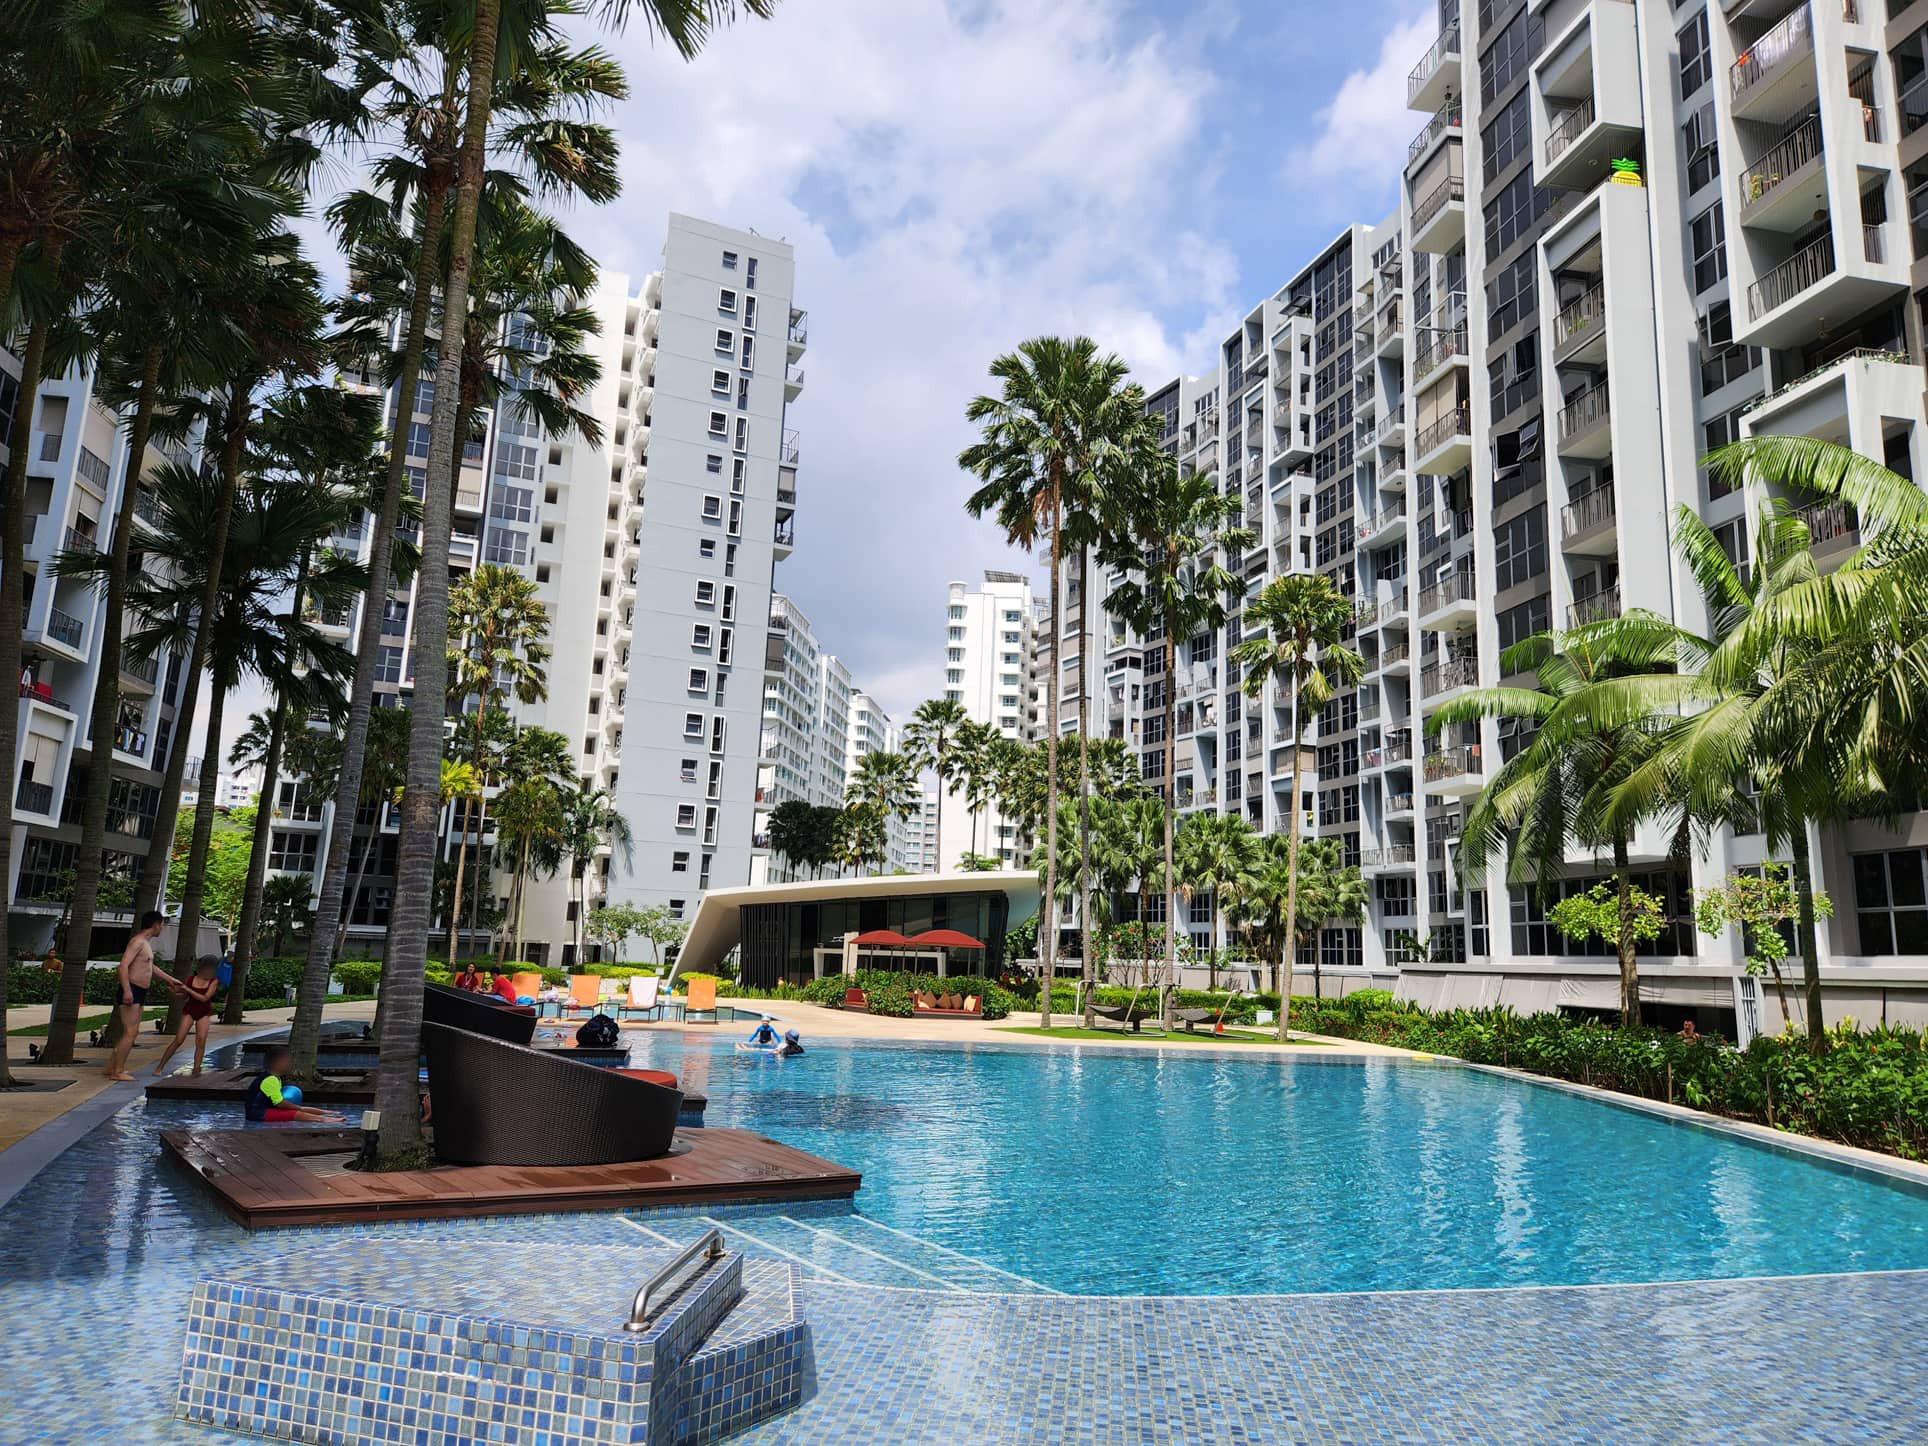 I've Lived At The Prive EC At Punggol For Nearly 2 Years: Here's My Review Of What It's Like To Live There